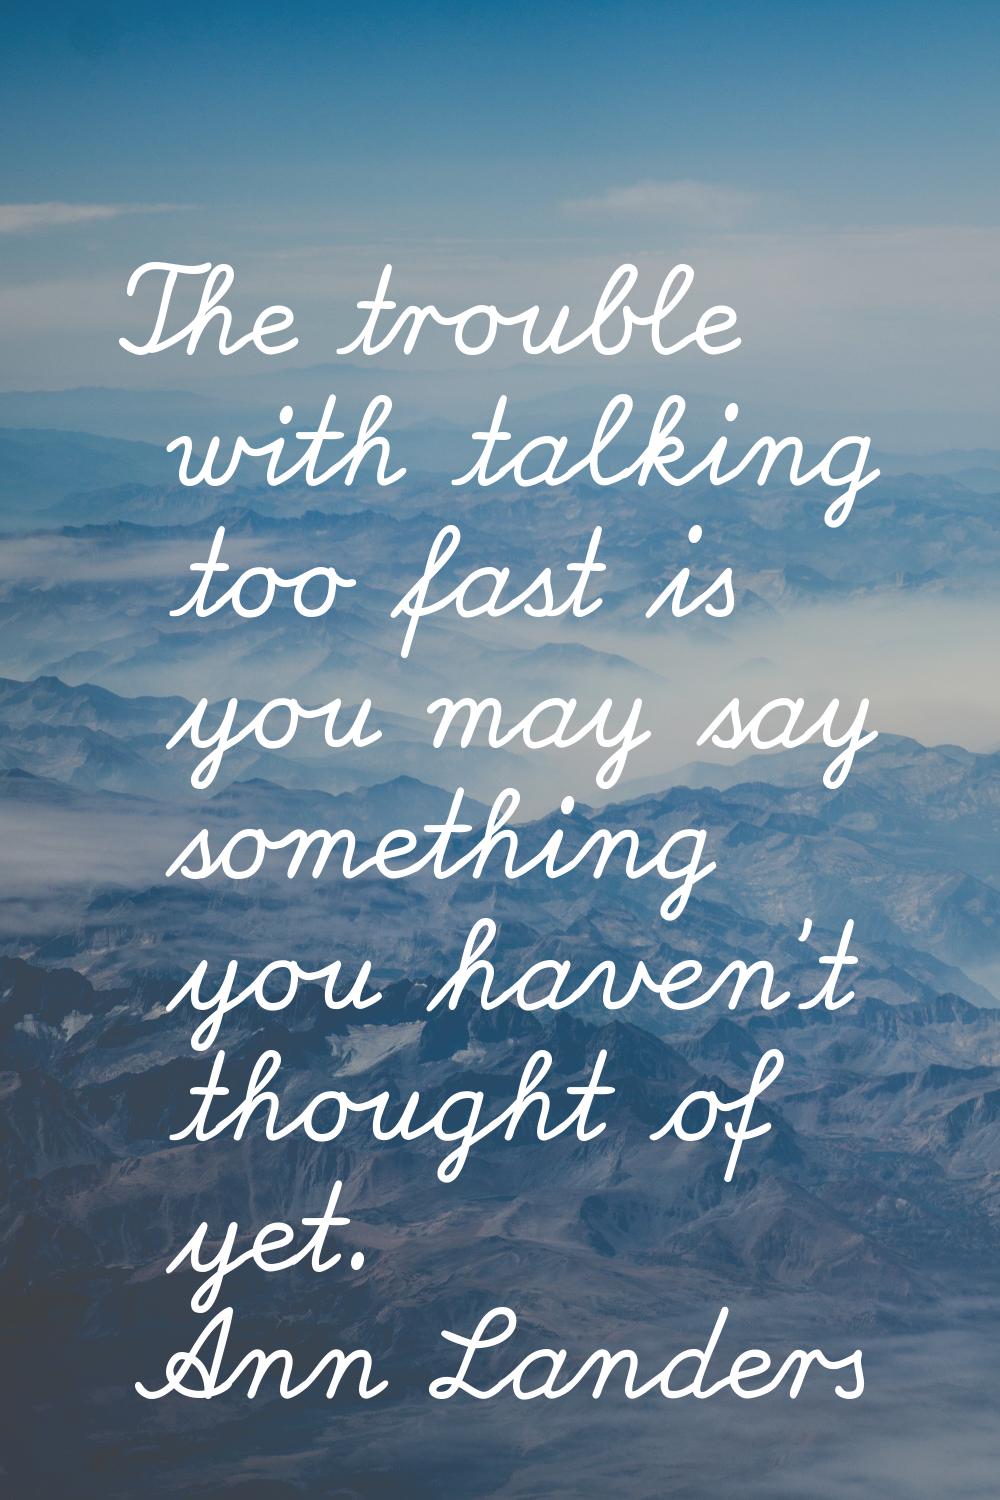 The trouble with talking too fast is you may say something you haven't thought of yet.